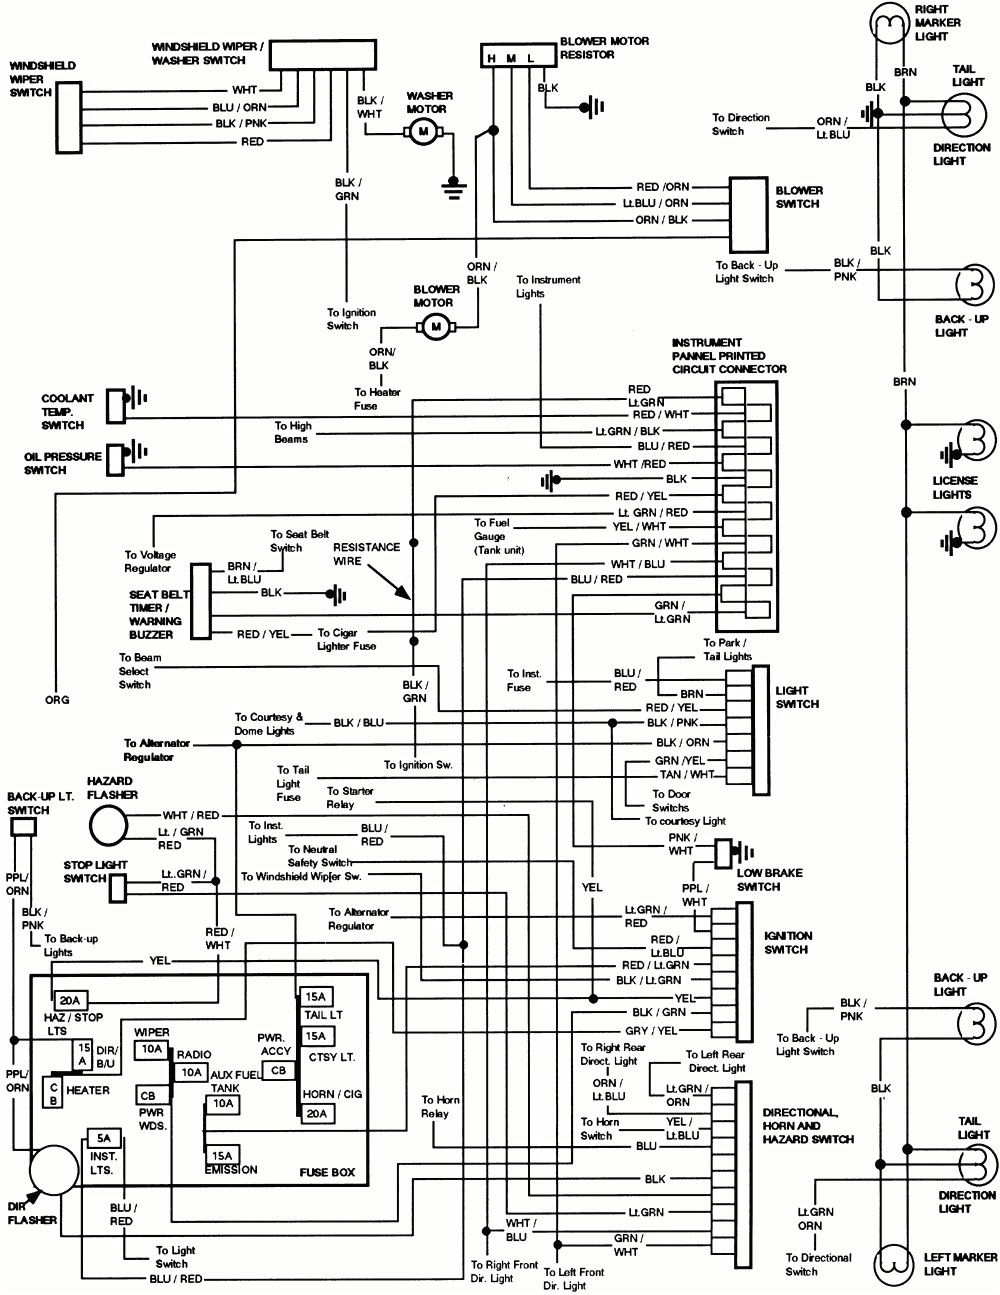 1995 f350 4x4 wiring harness wiring diagram post 1995 ford f350 wiring schematic